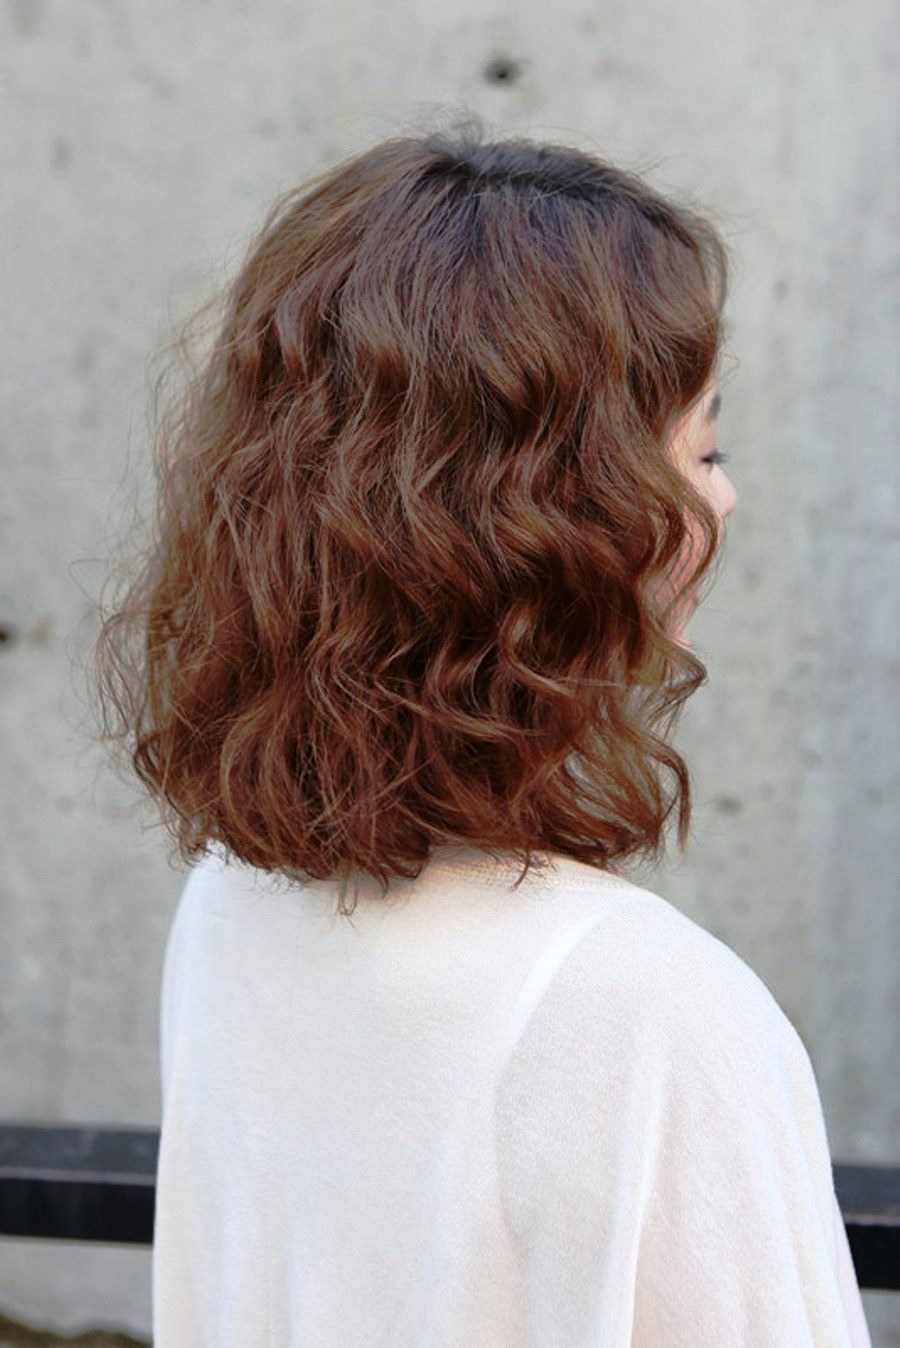 Short Red Curly Hairstyle